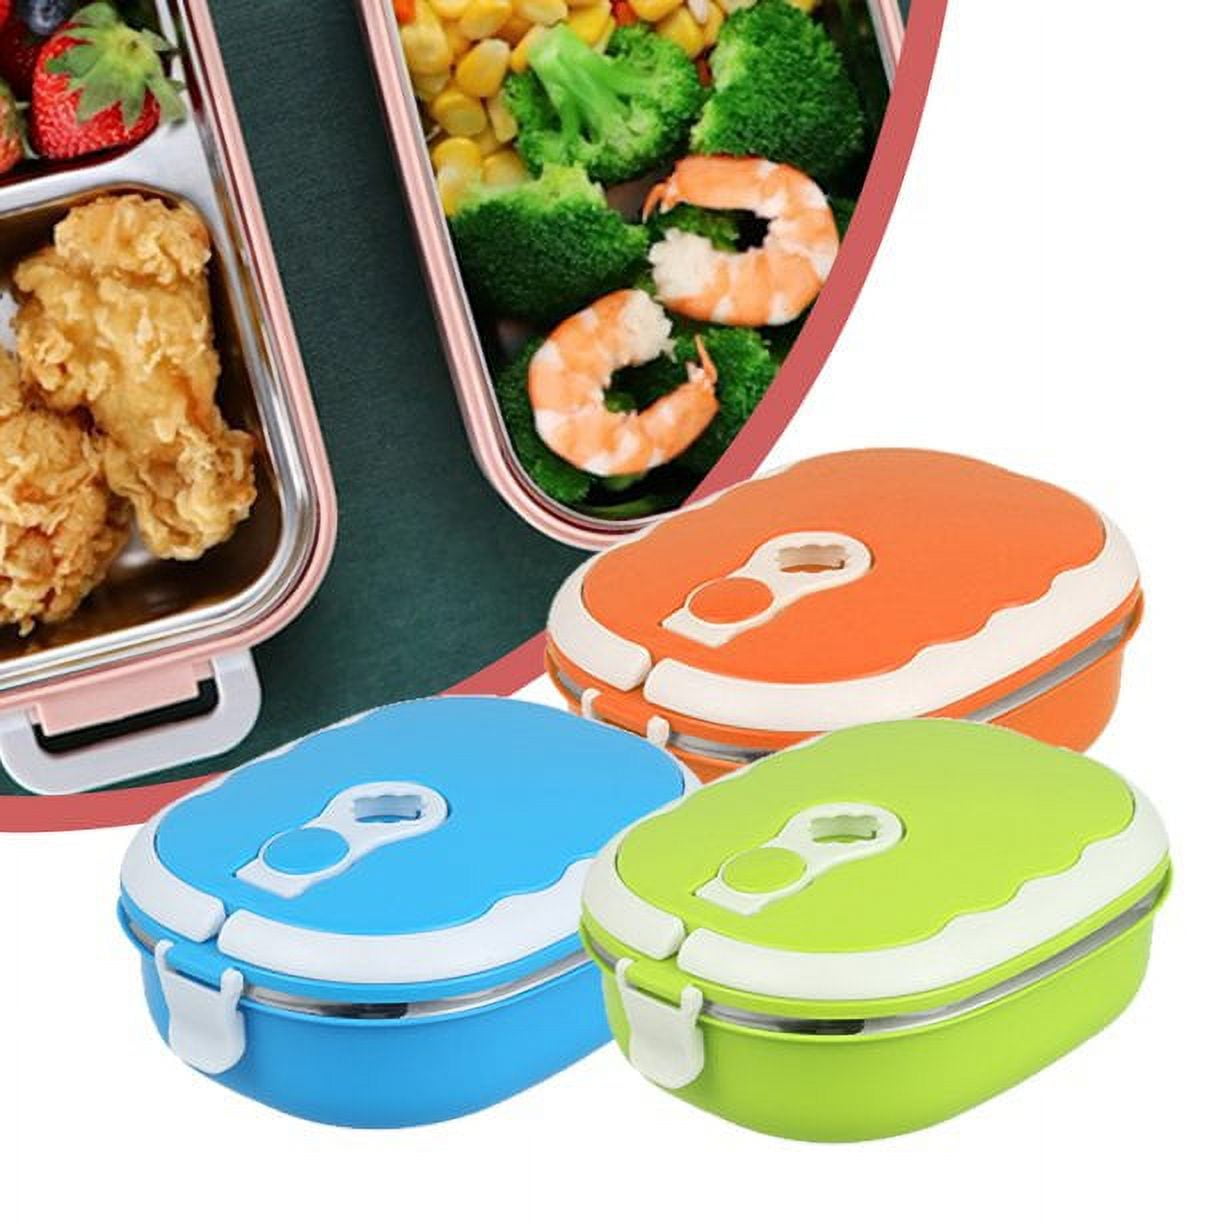 ybobk home thermal bento lunch box, portable insulated lunch container for  kid aldult to school work, keep food warm stainles